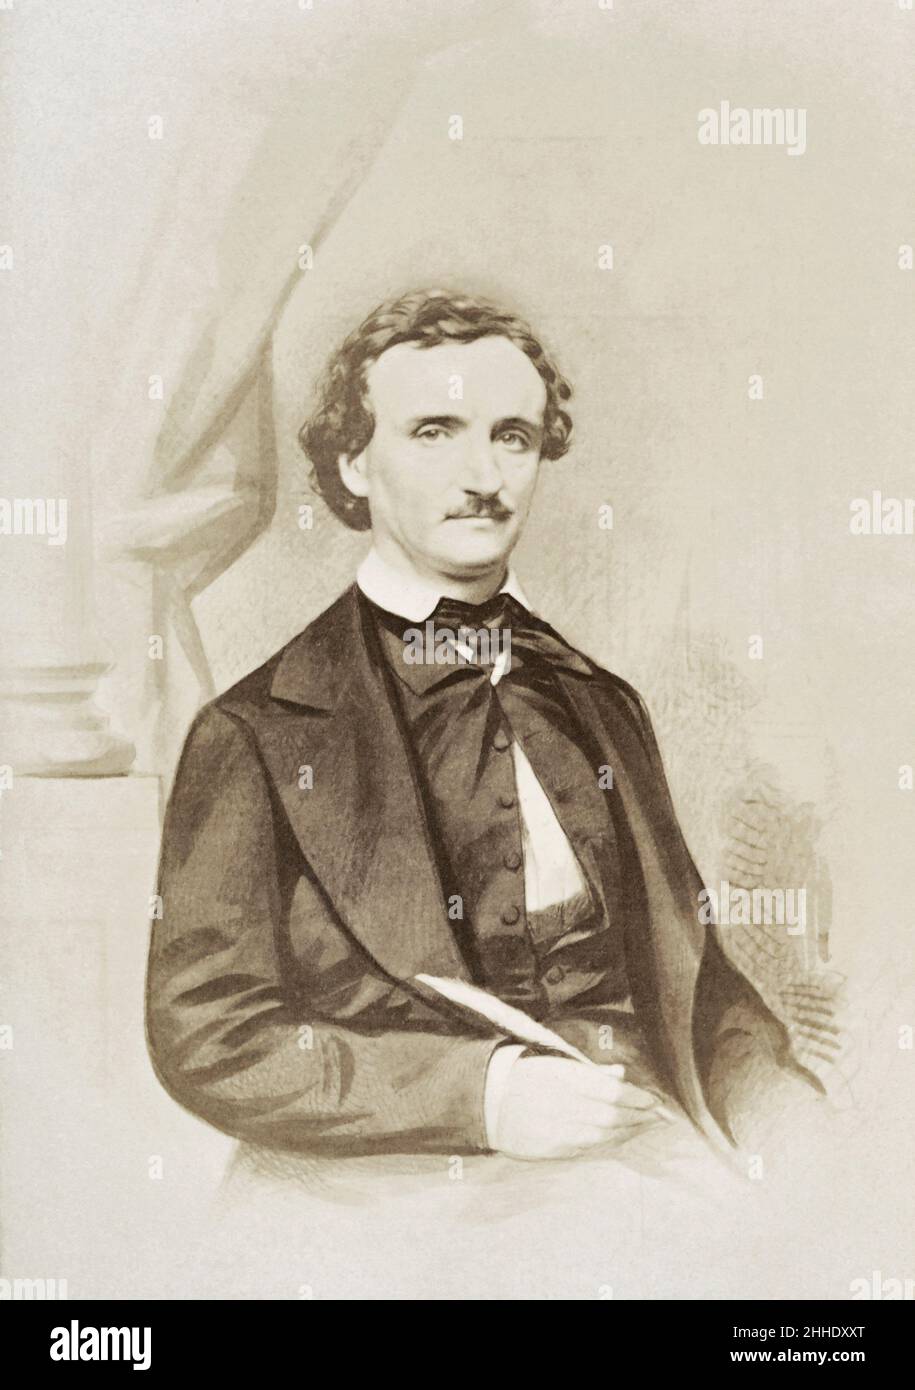 Edgar Allen Poe, 1809 - 1849.  American author, famous for such stories as The Pit and the Pendalum and The Murders in the Rue Morgue.  After a 19th century portrait. Stock Photo